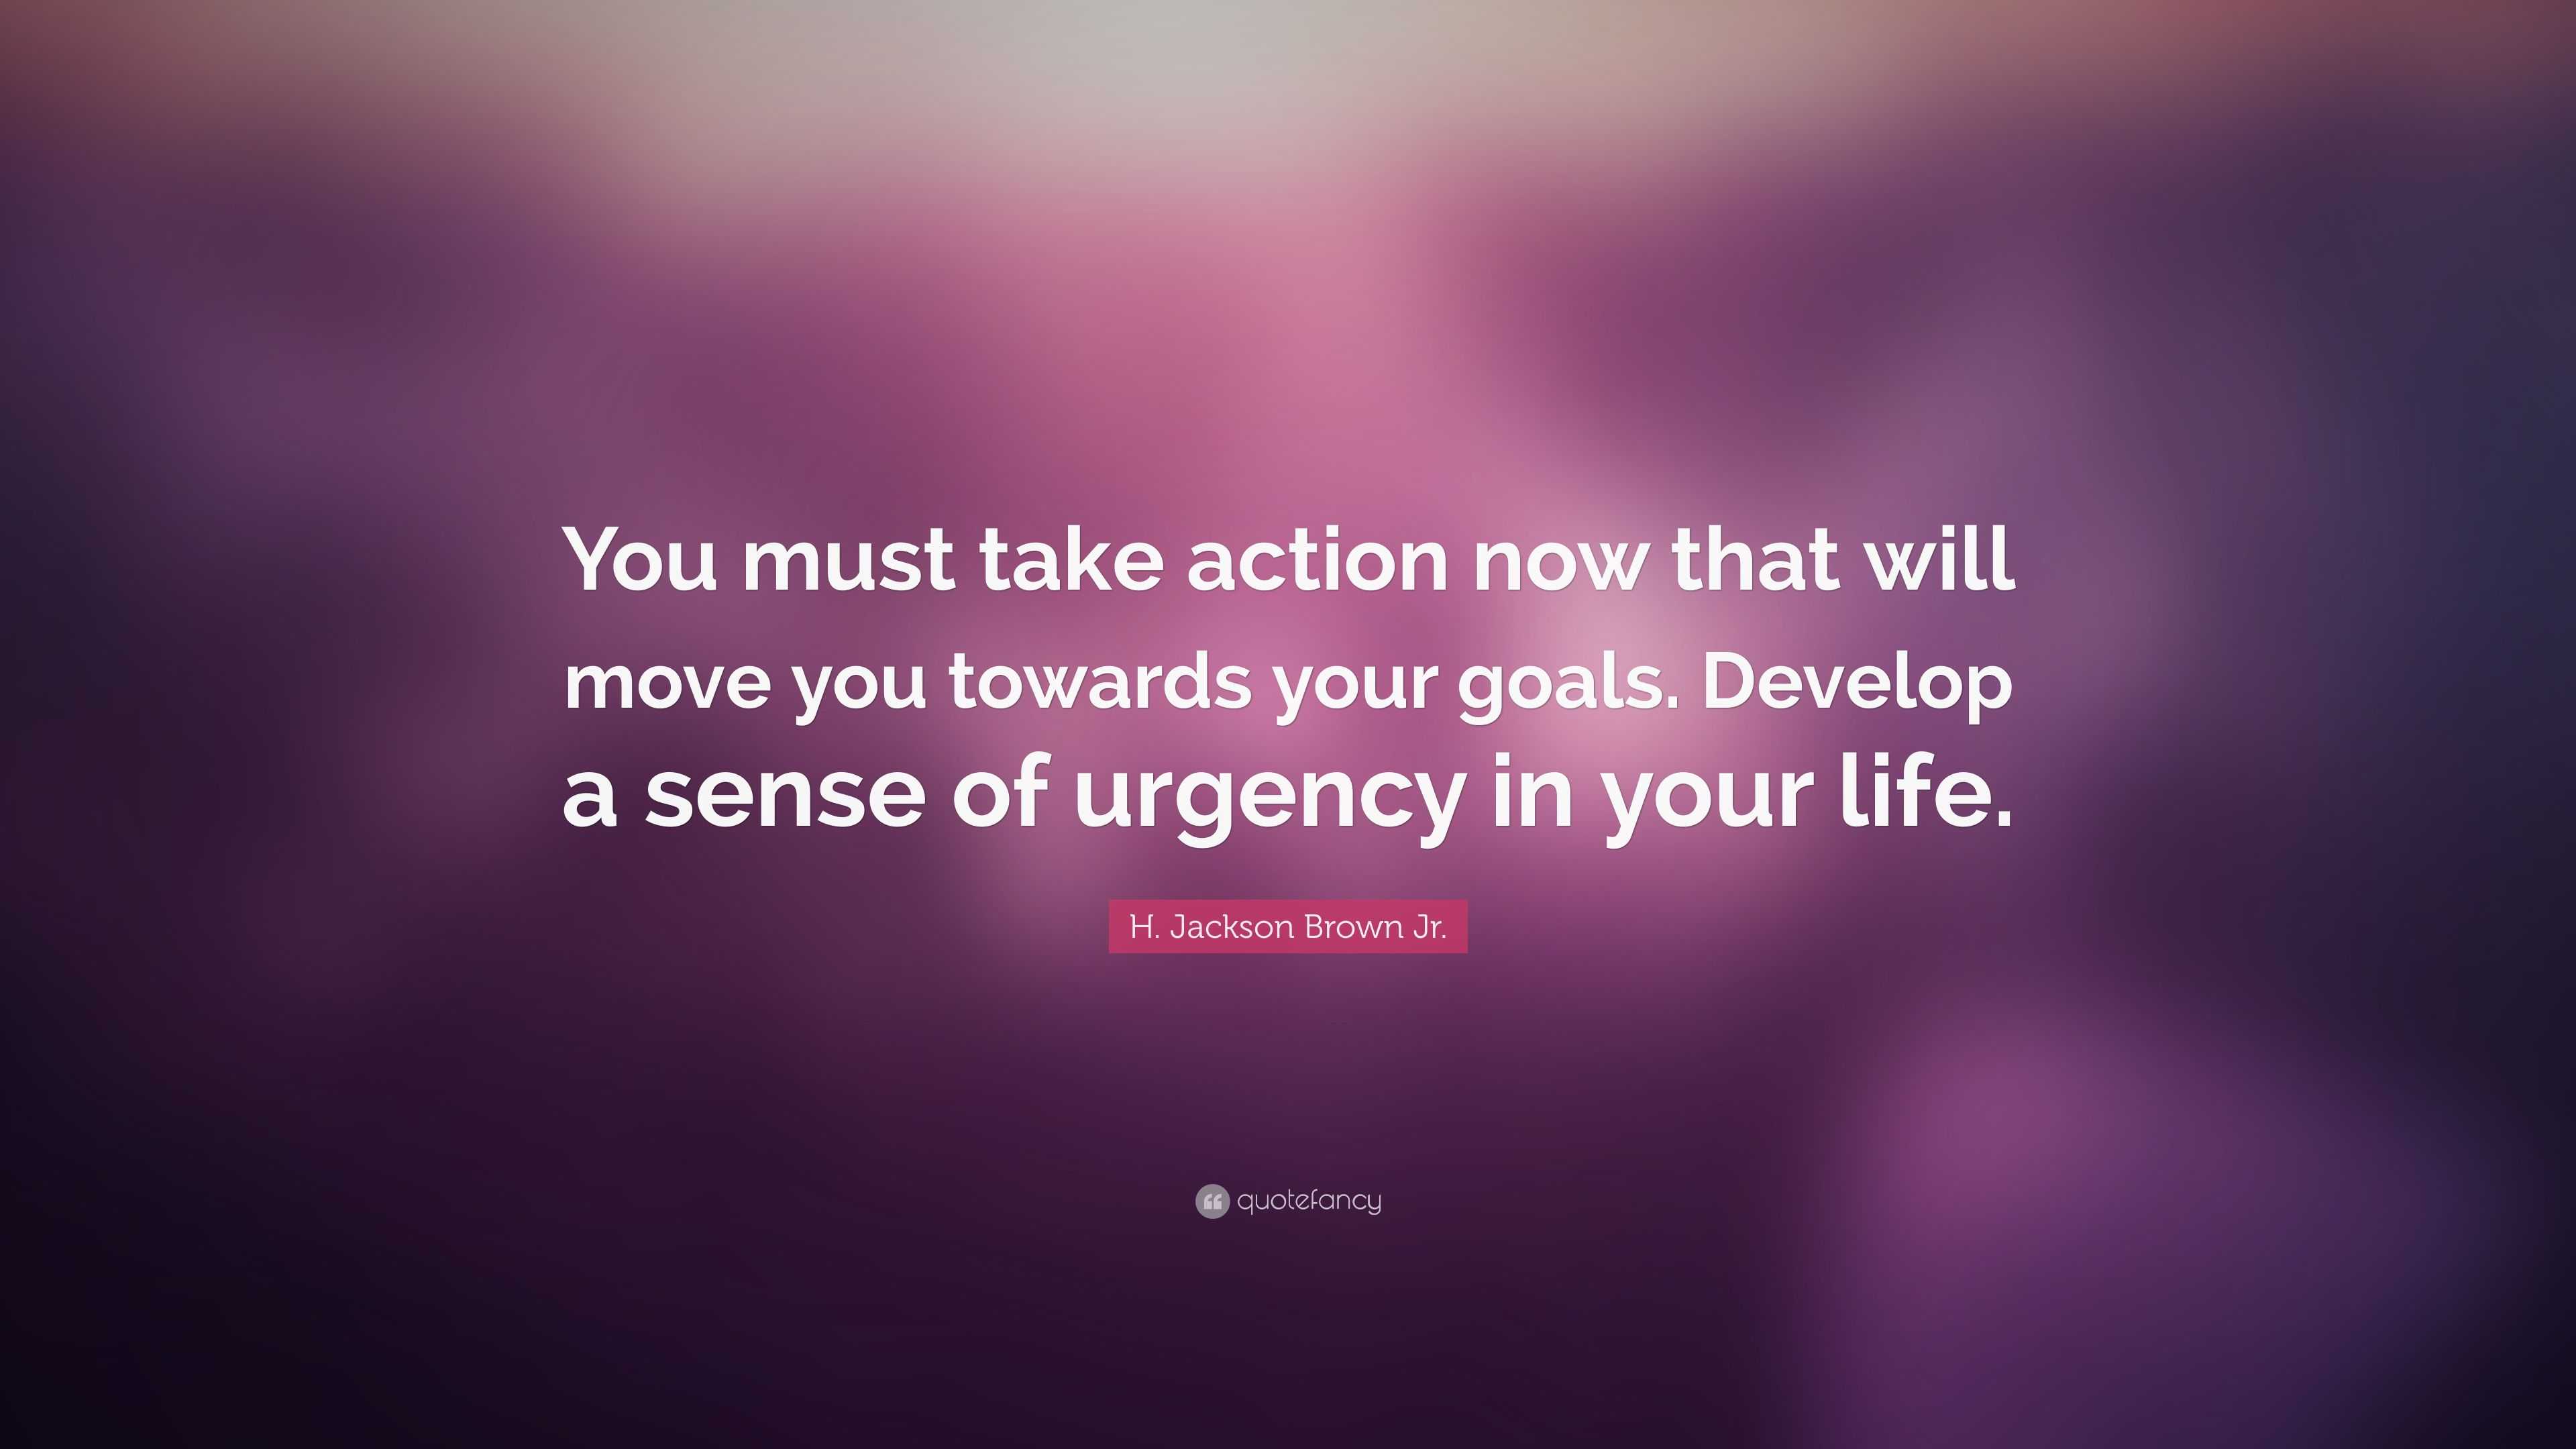 H. Jackson Brown Jr. Quote: “You must take action now that will move ...